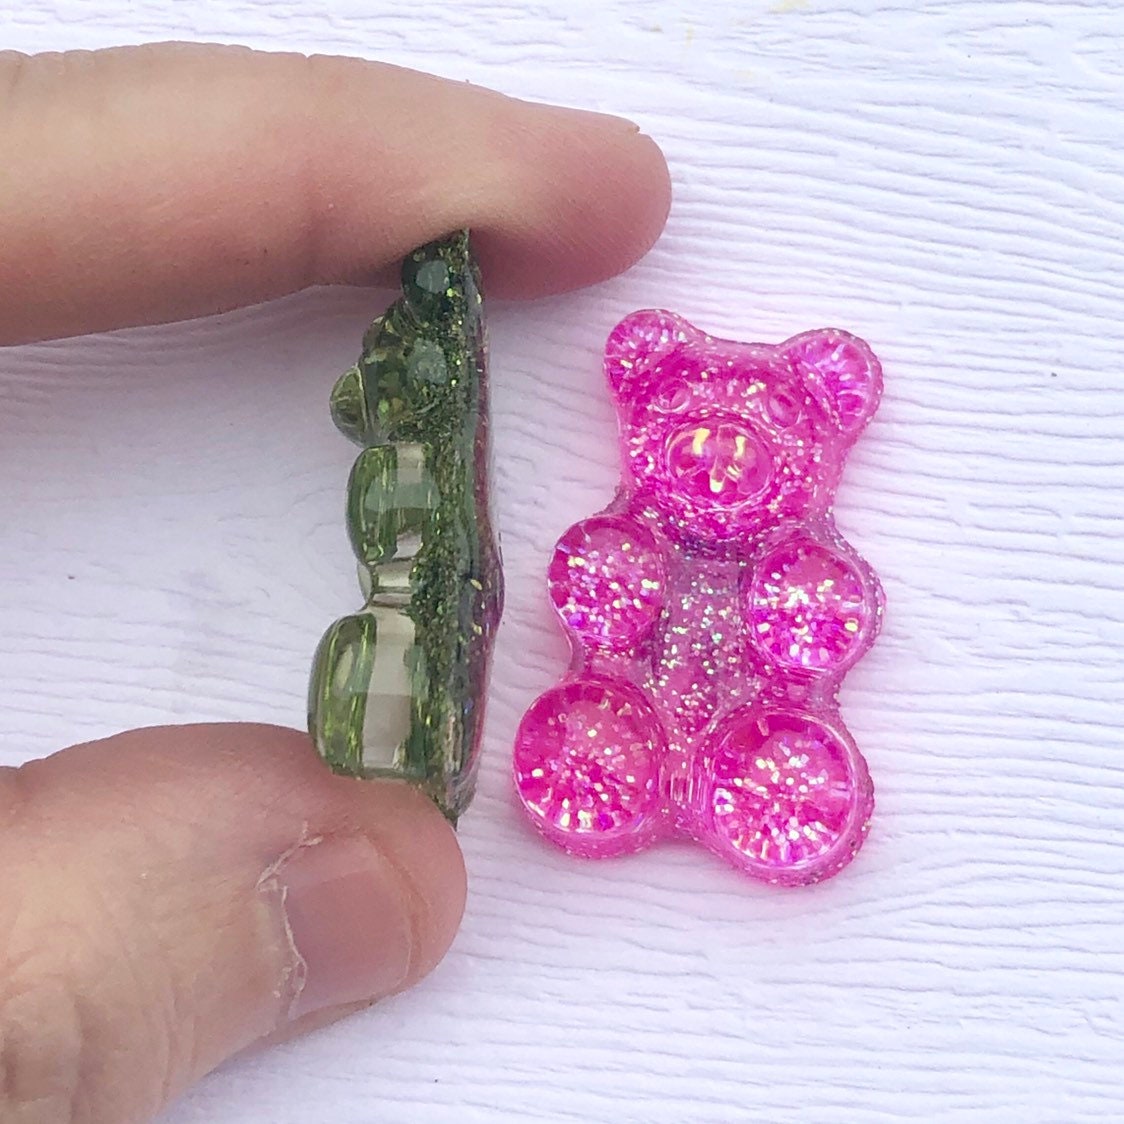 Candy Bears Customized with 2 Initials Hot Pink and Green